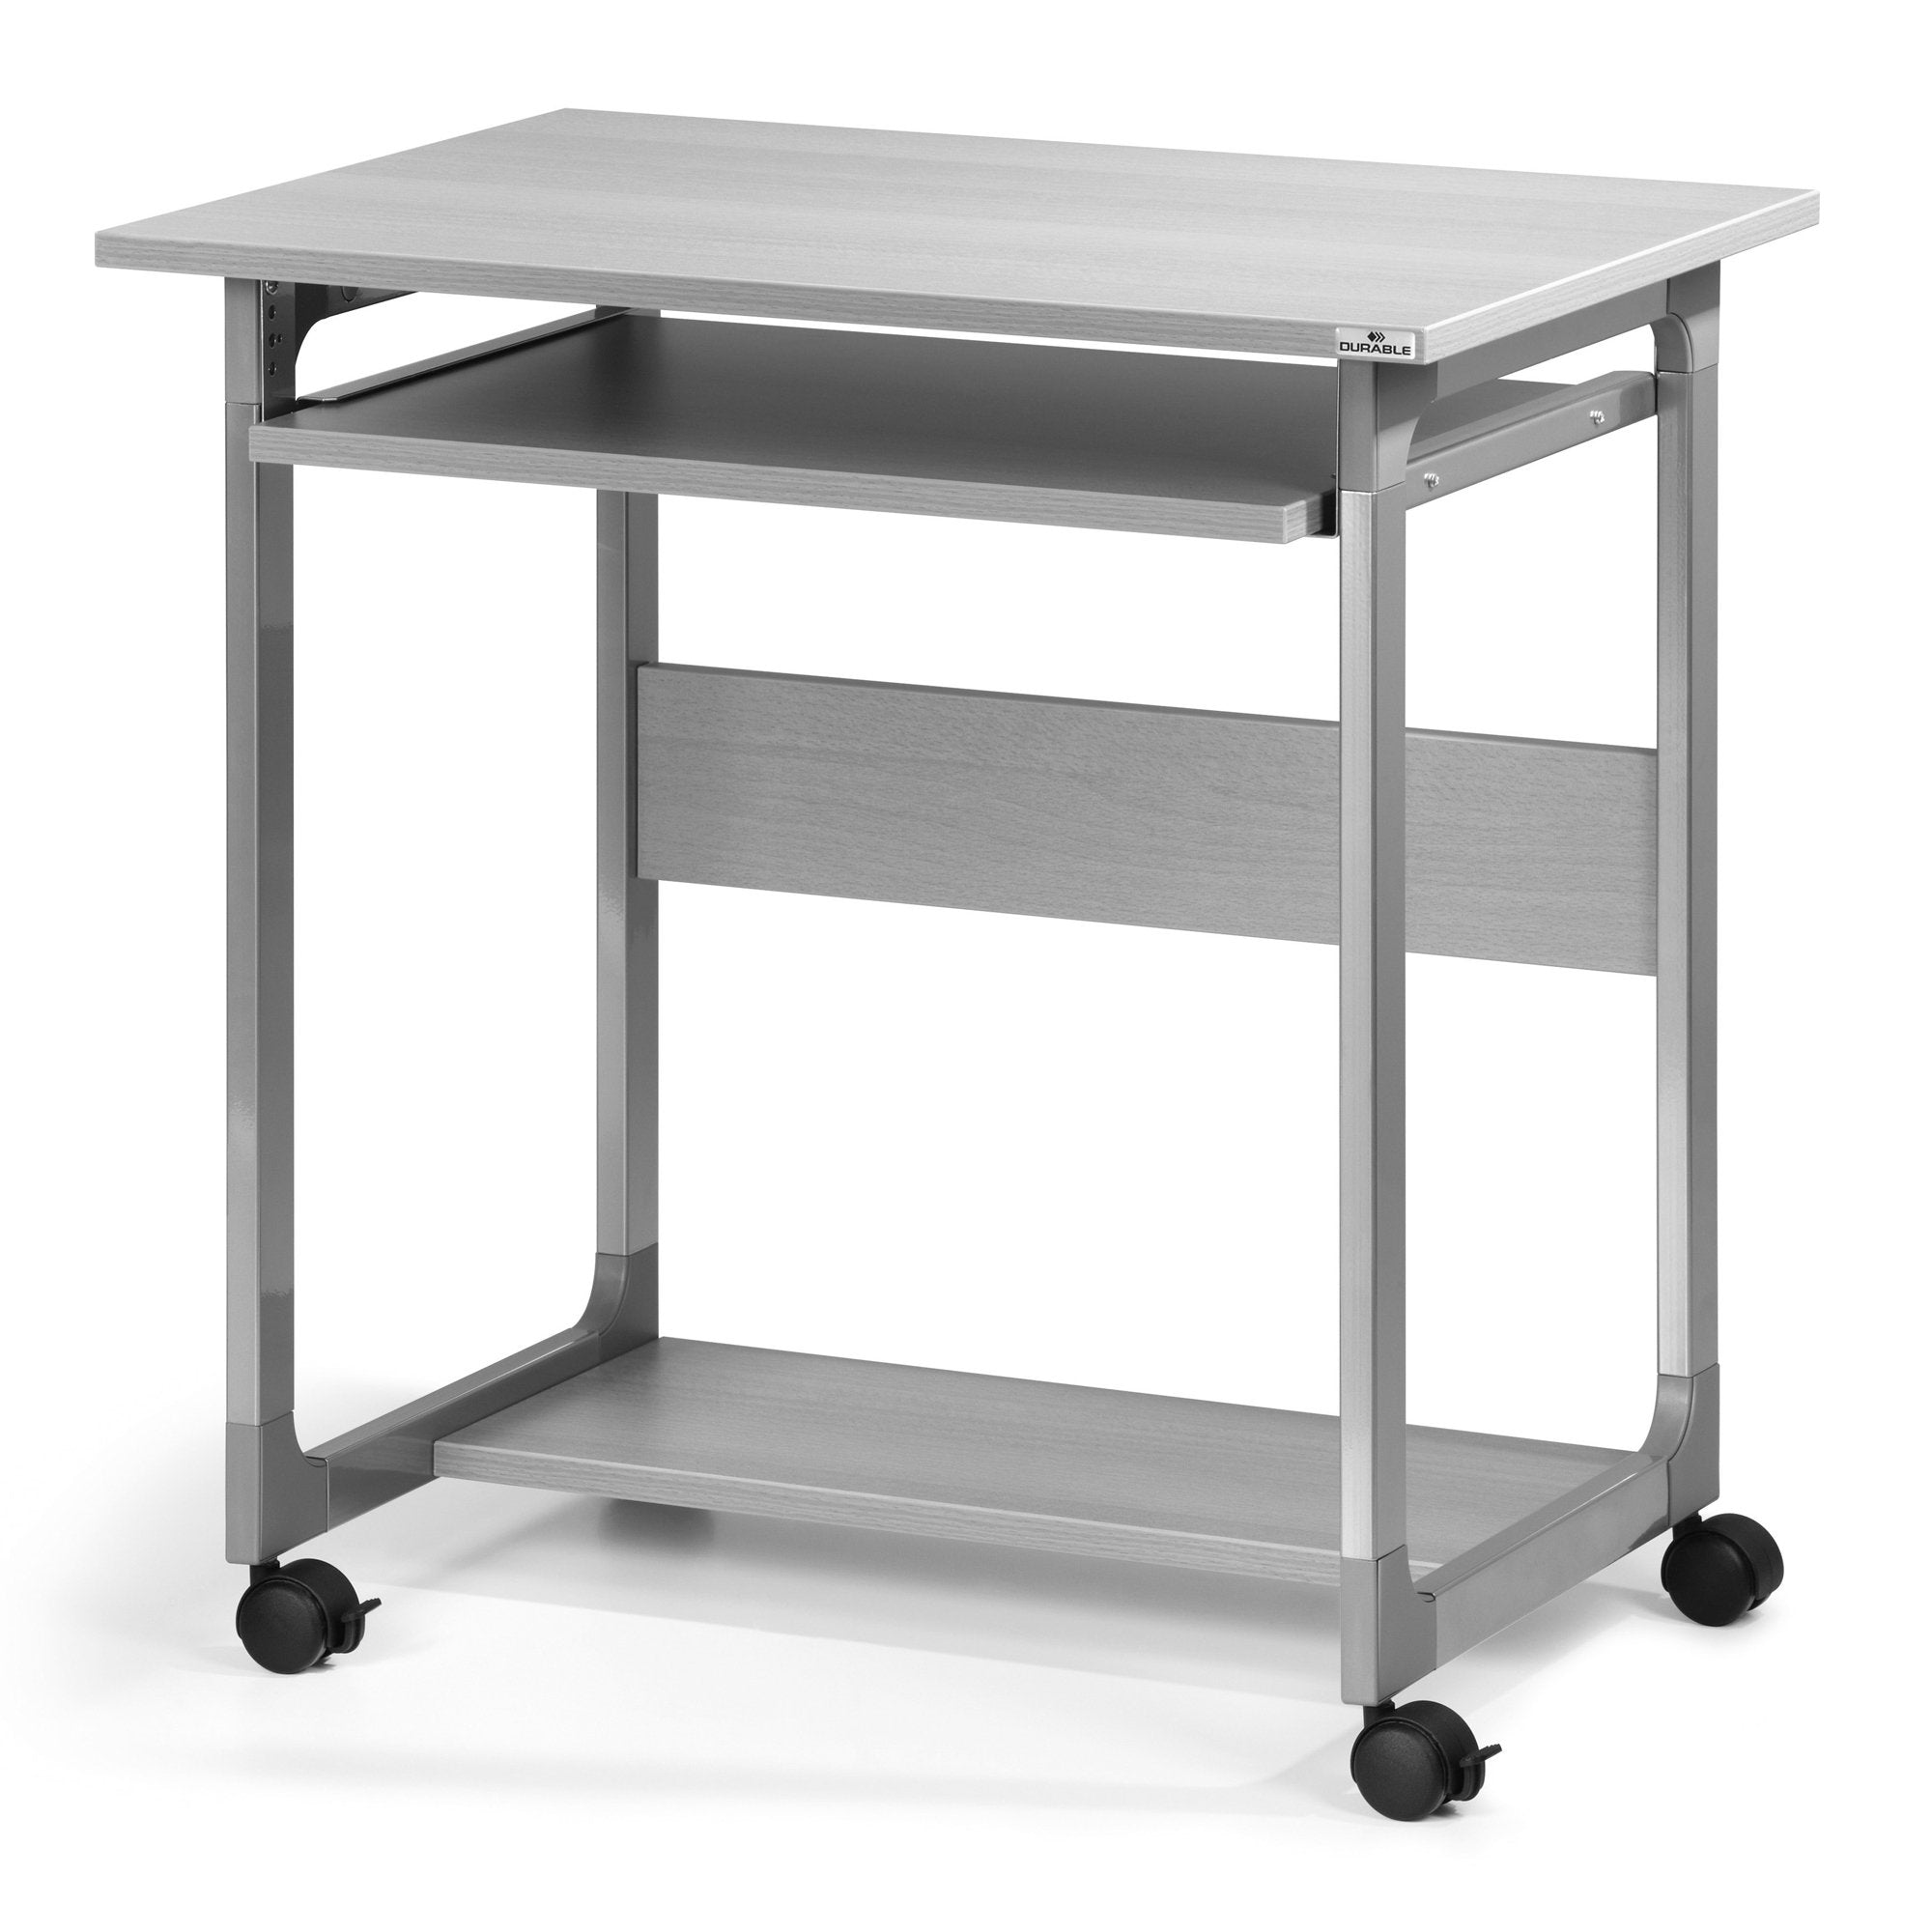 durable-pc-workstation-system-75-fh-grigio